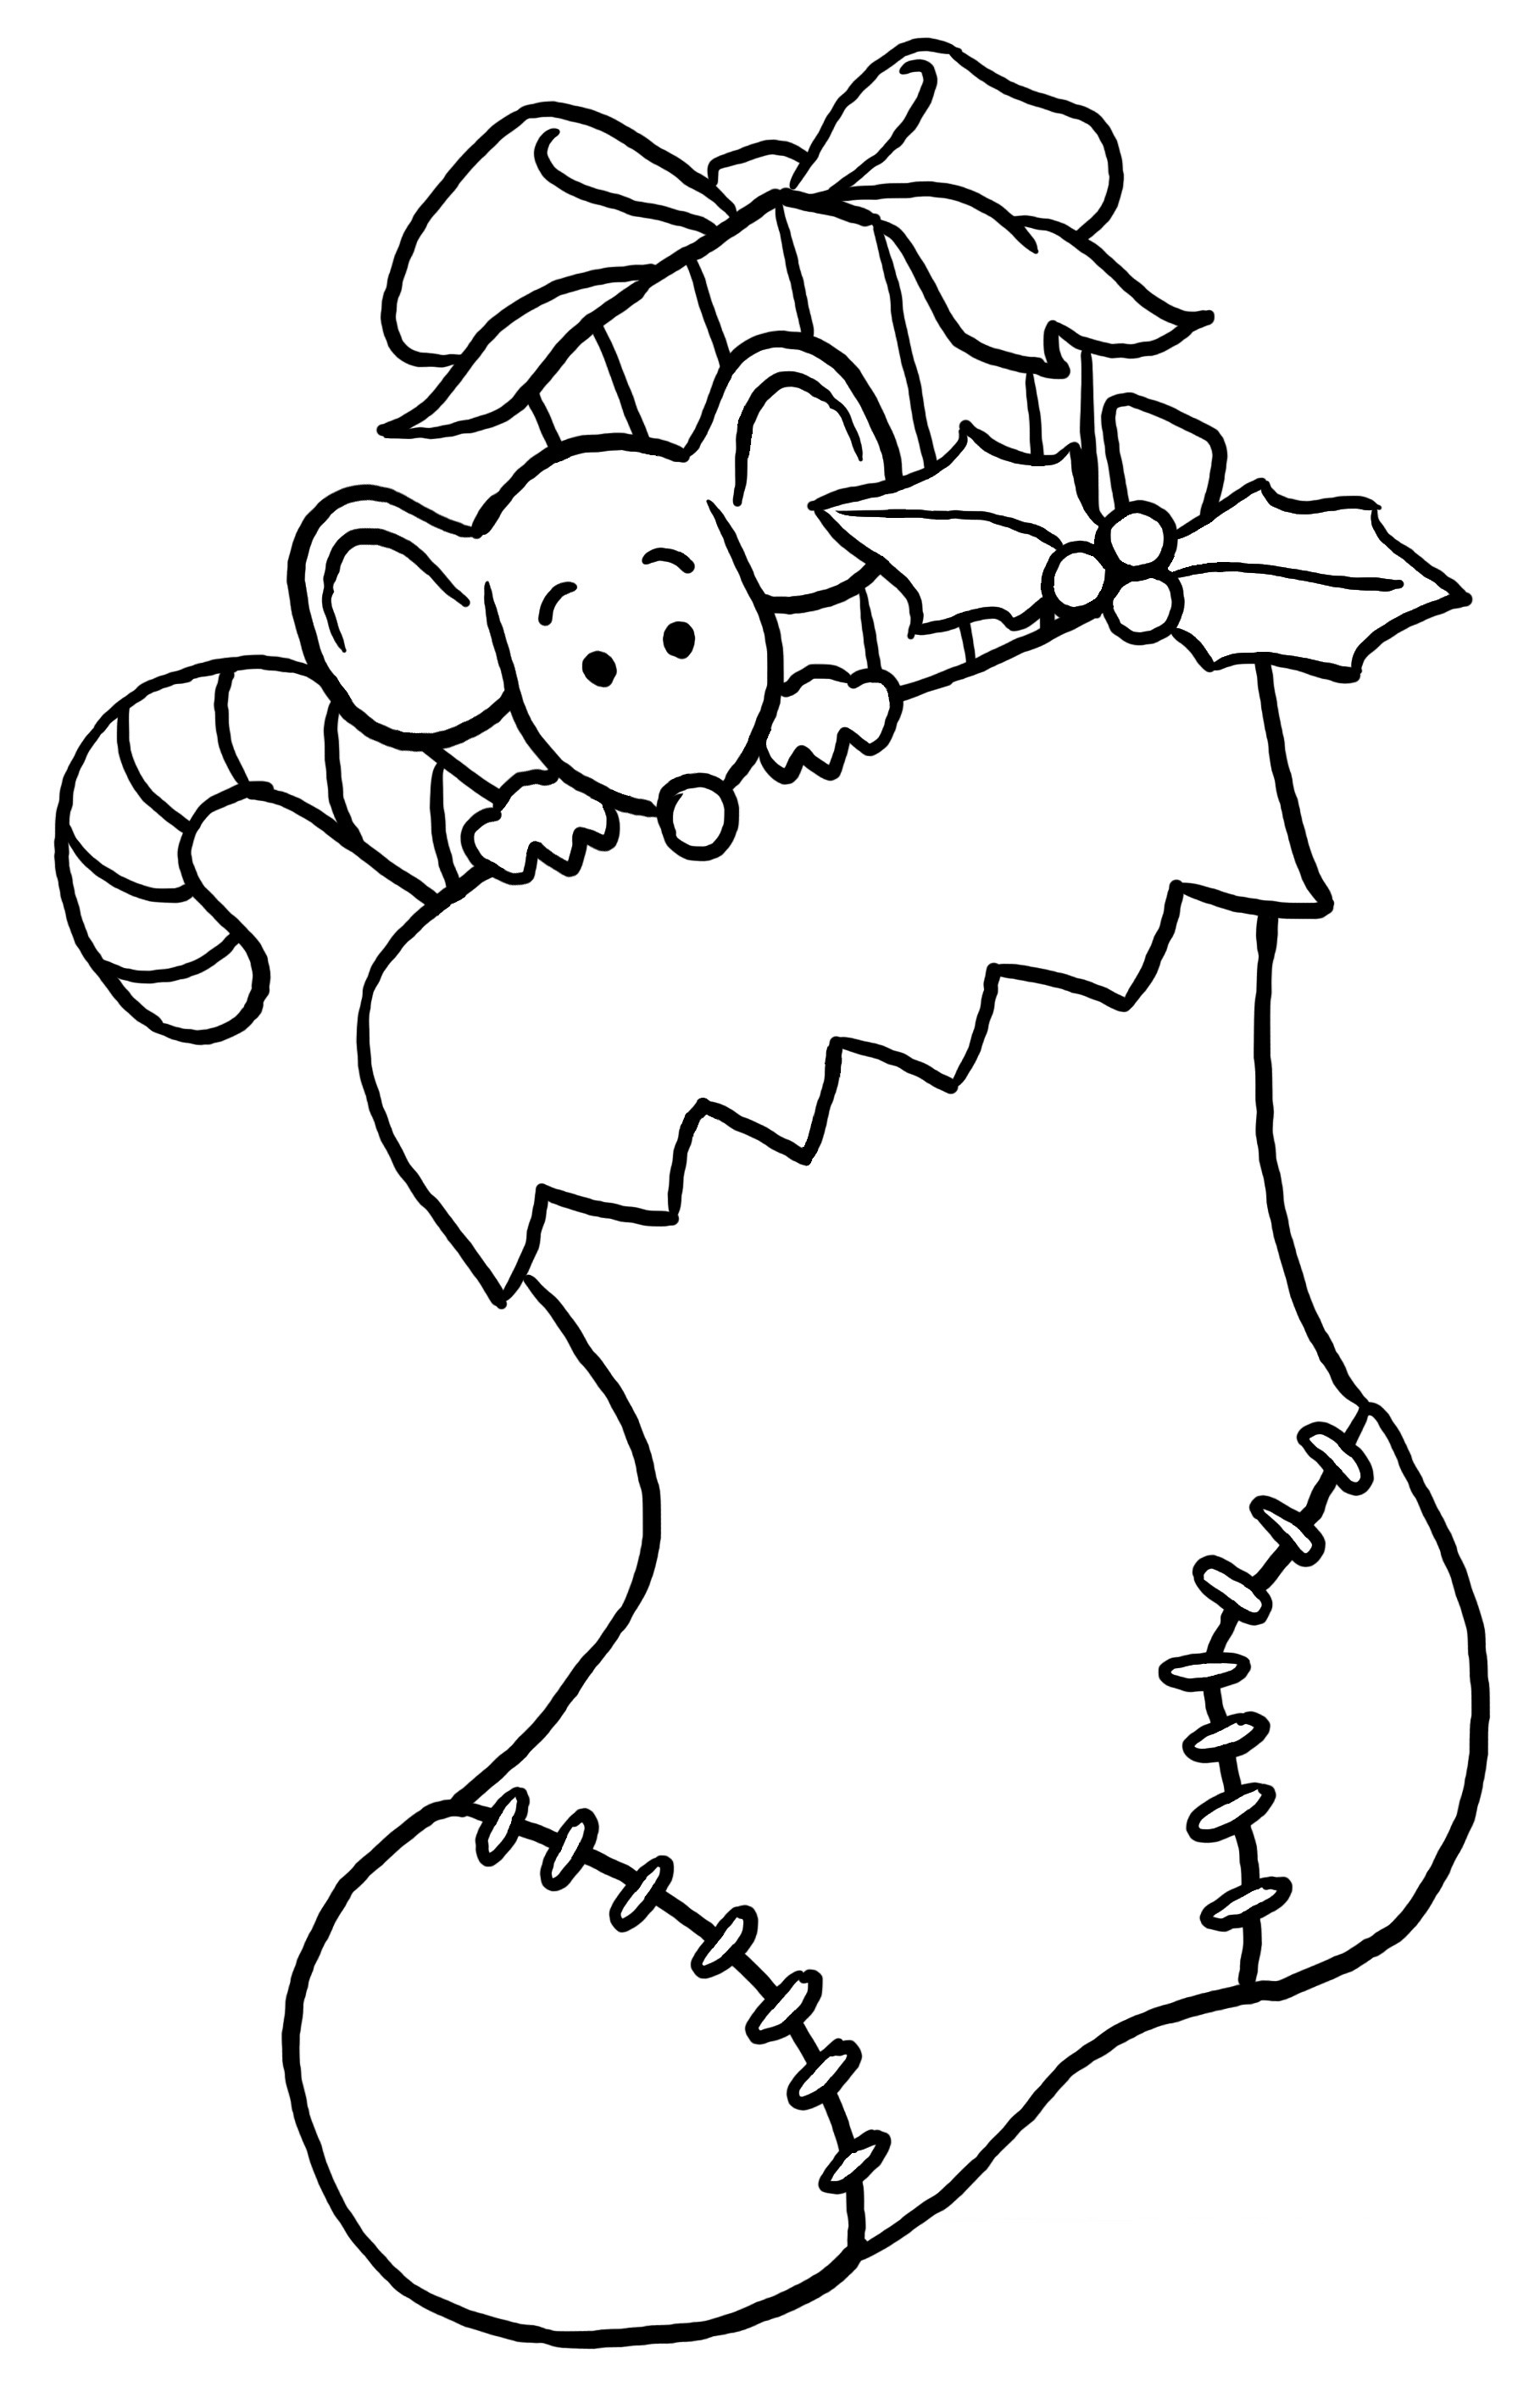 Free Coloring Sheets For Christmas To Print
 Christmas Coloring Pages Free And Printable